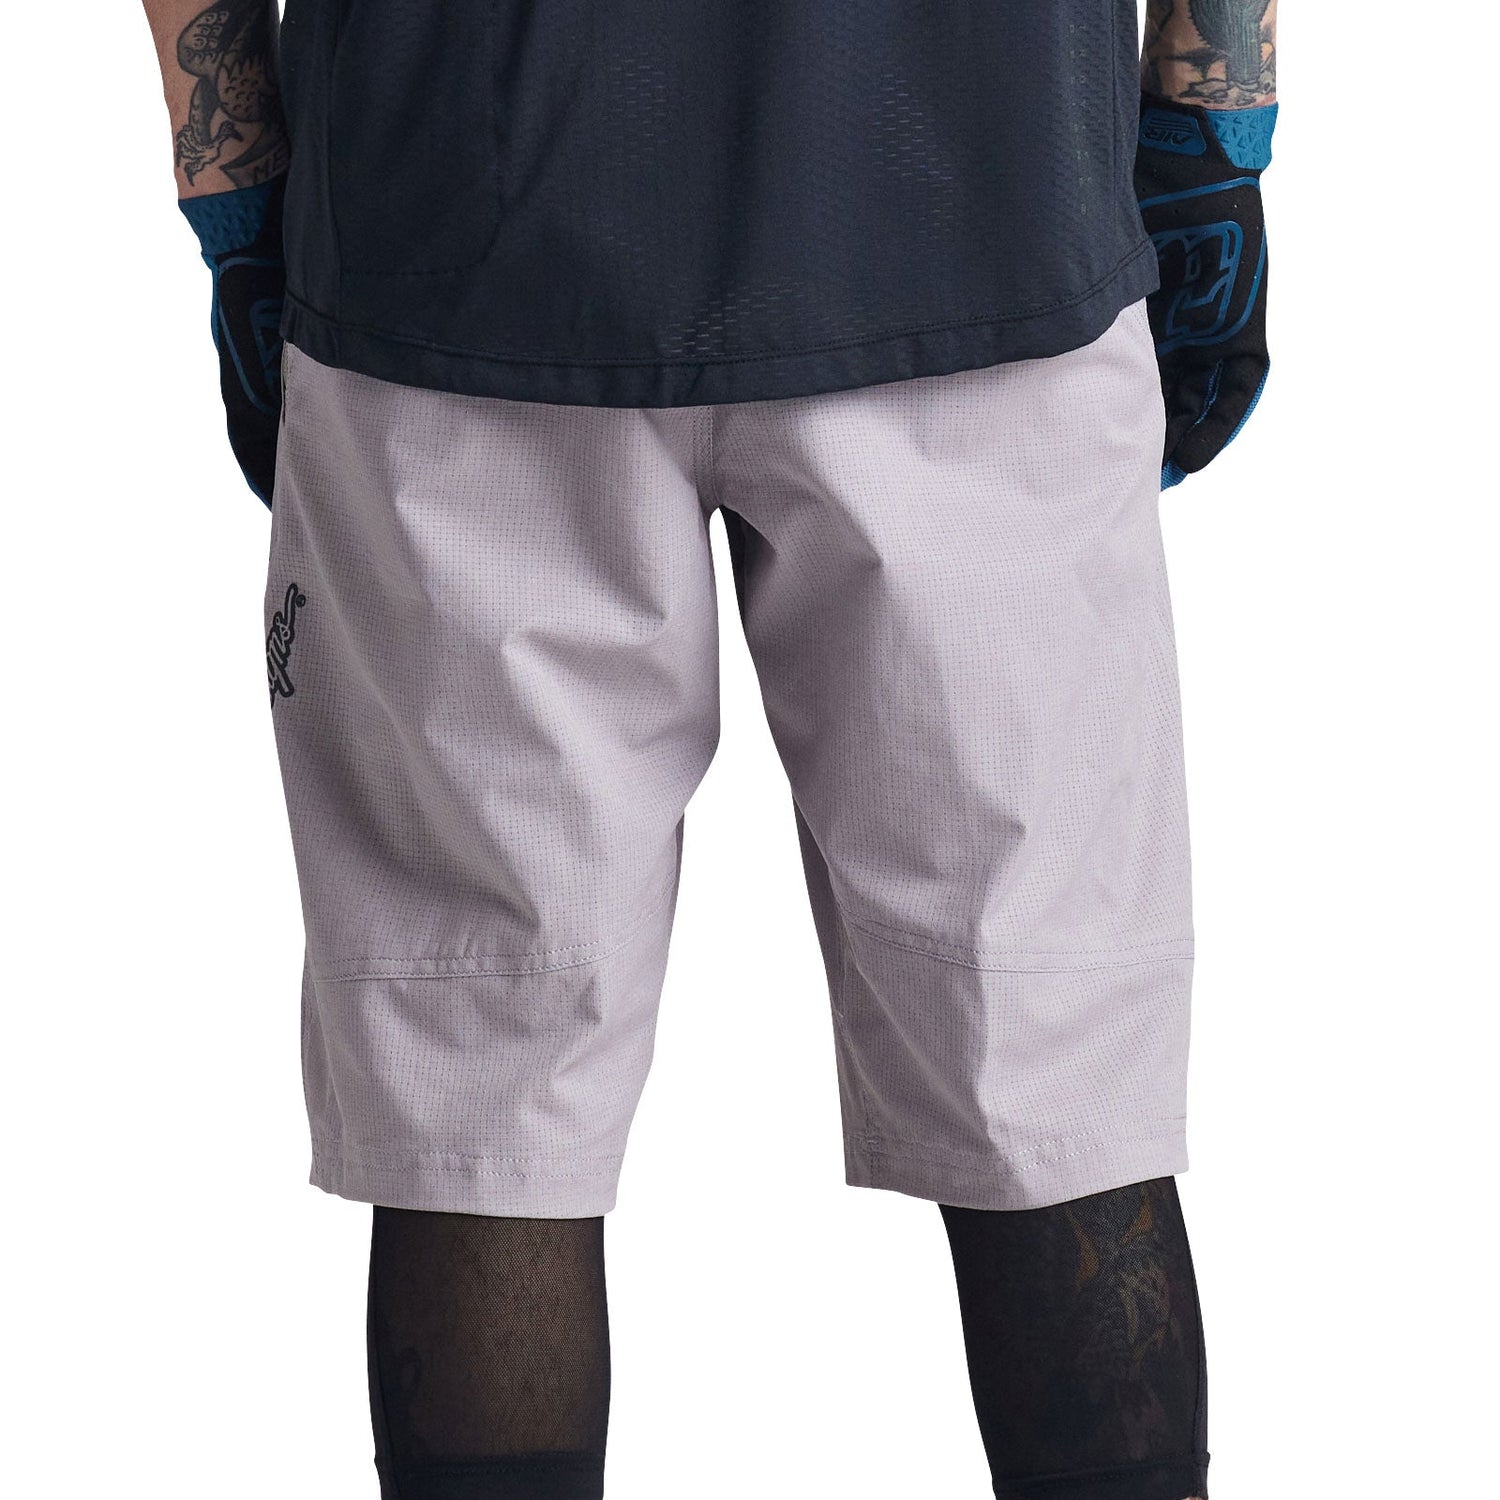 Troy Lee Skyline Air Short W/liner Mono Charcoal